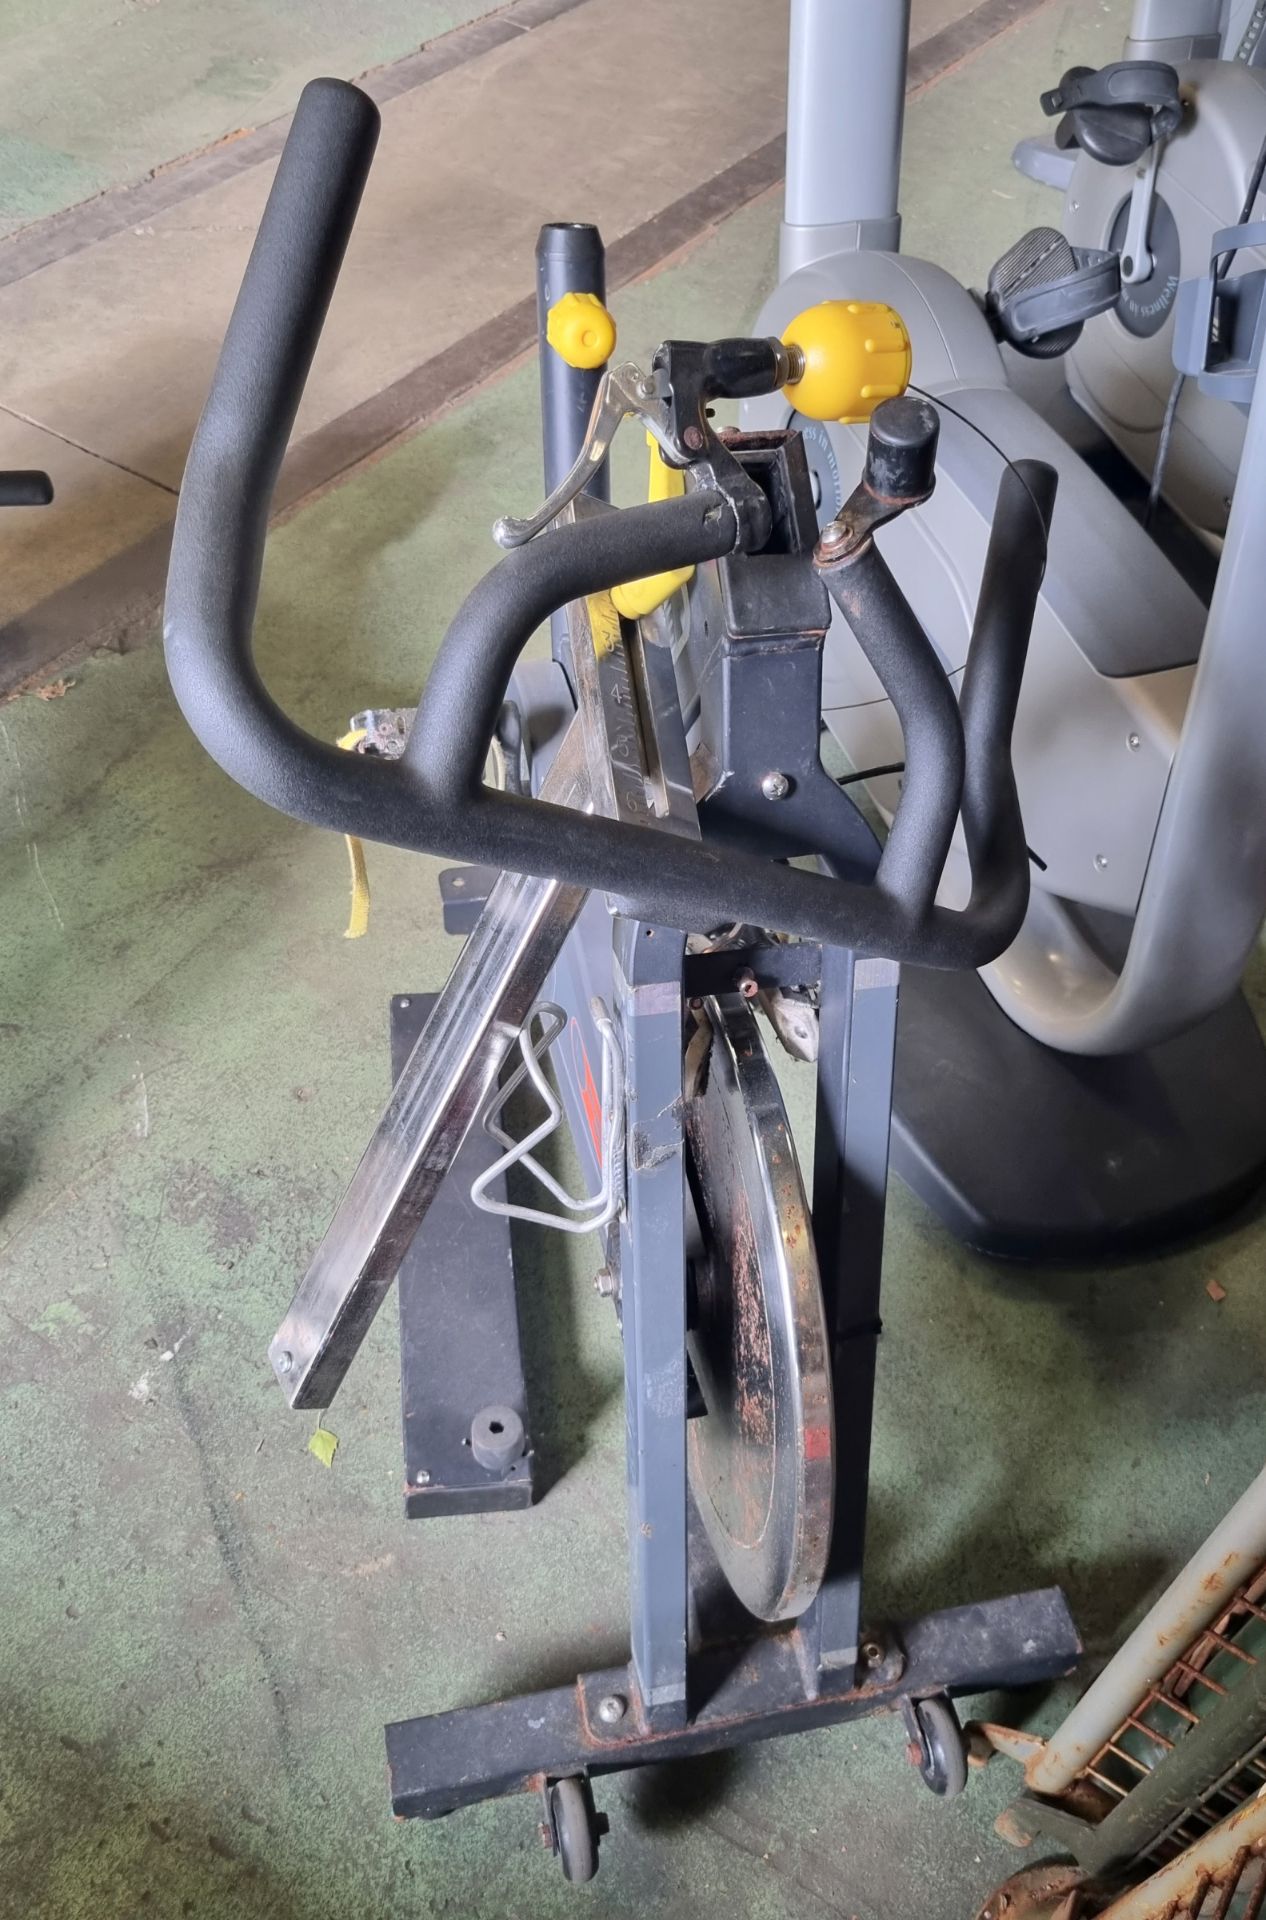 Pulse fitness group cycle Spin bike L 100 x W 50 x H 120 cm - AS SPARES OR REPAIRS - Image 3 of 4